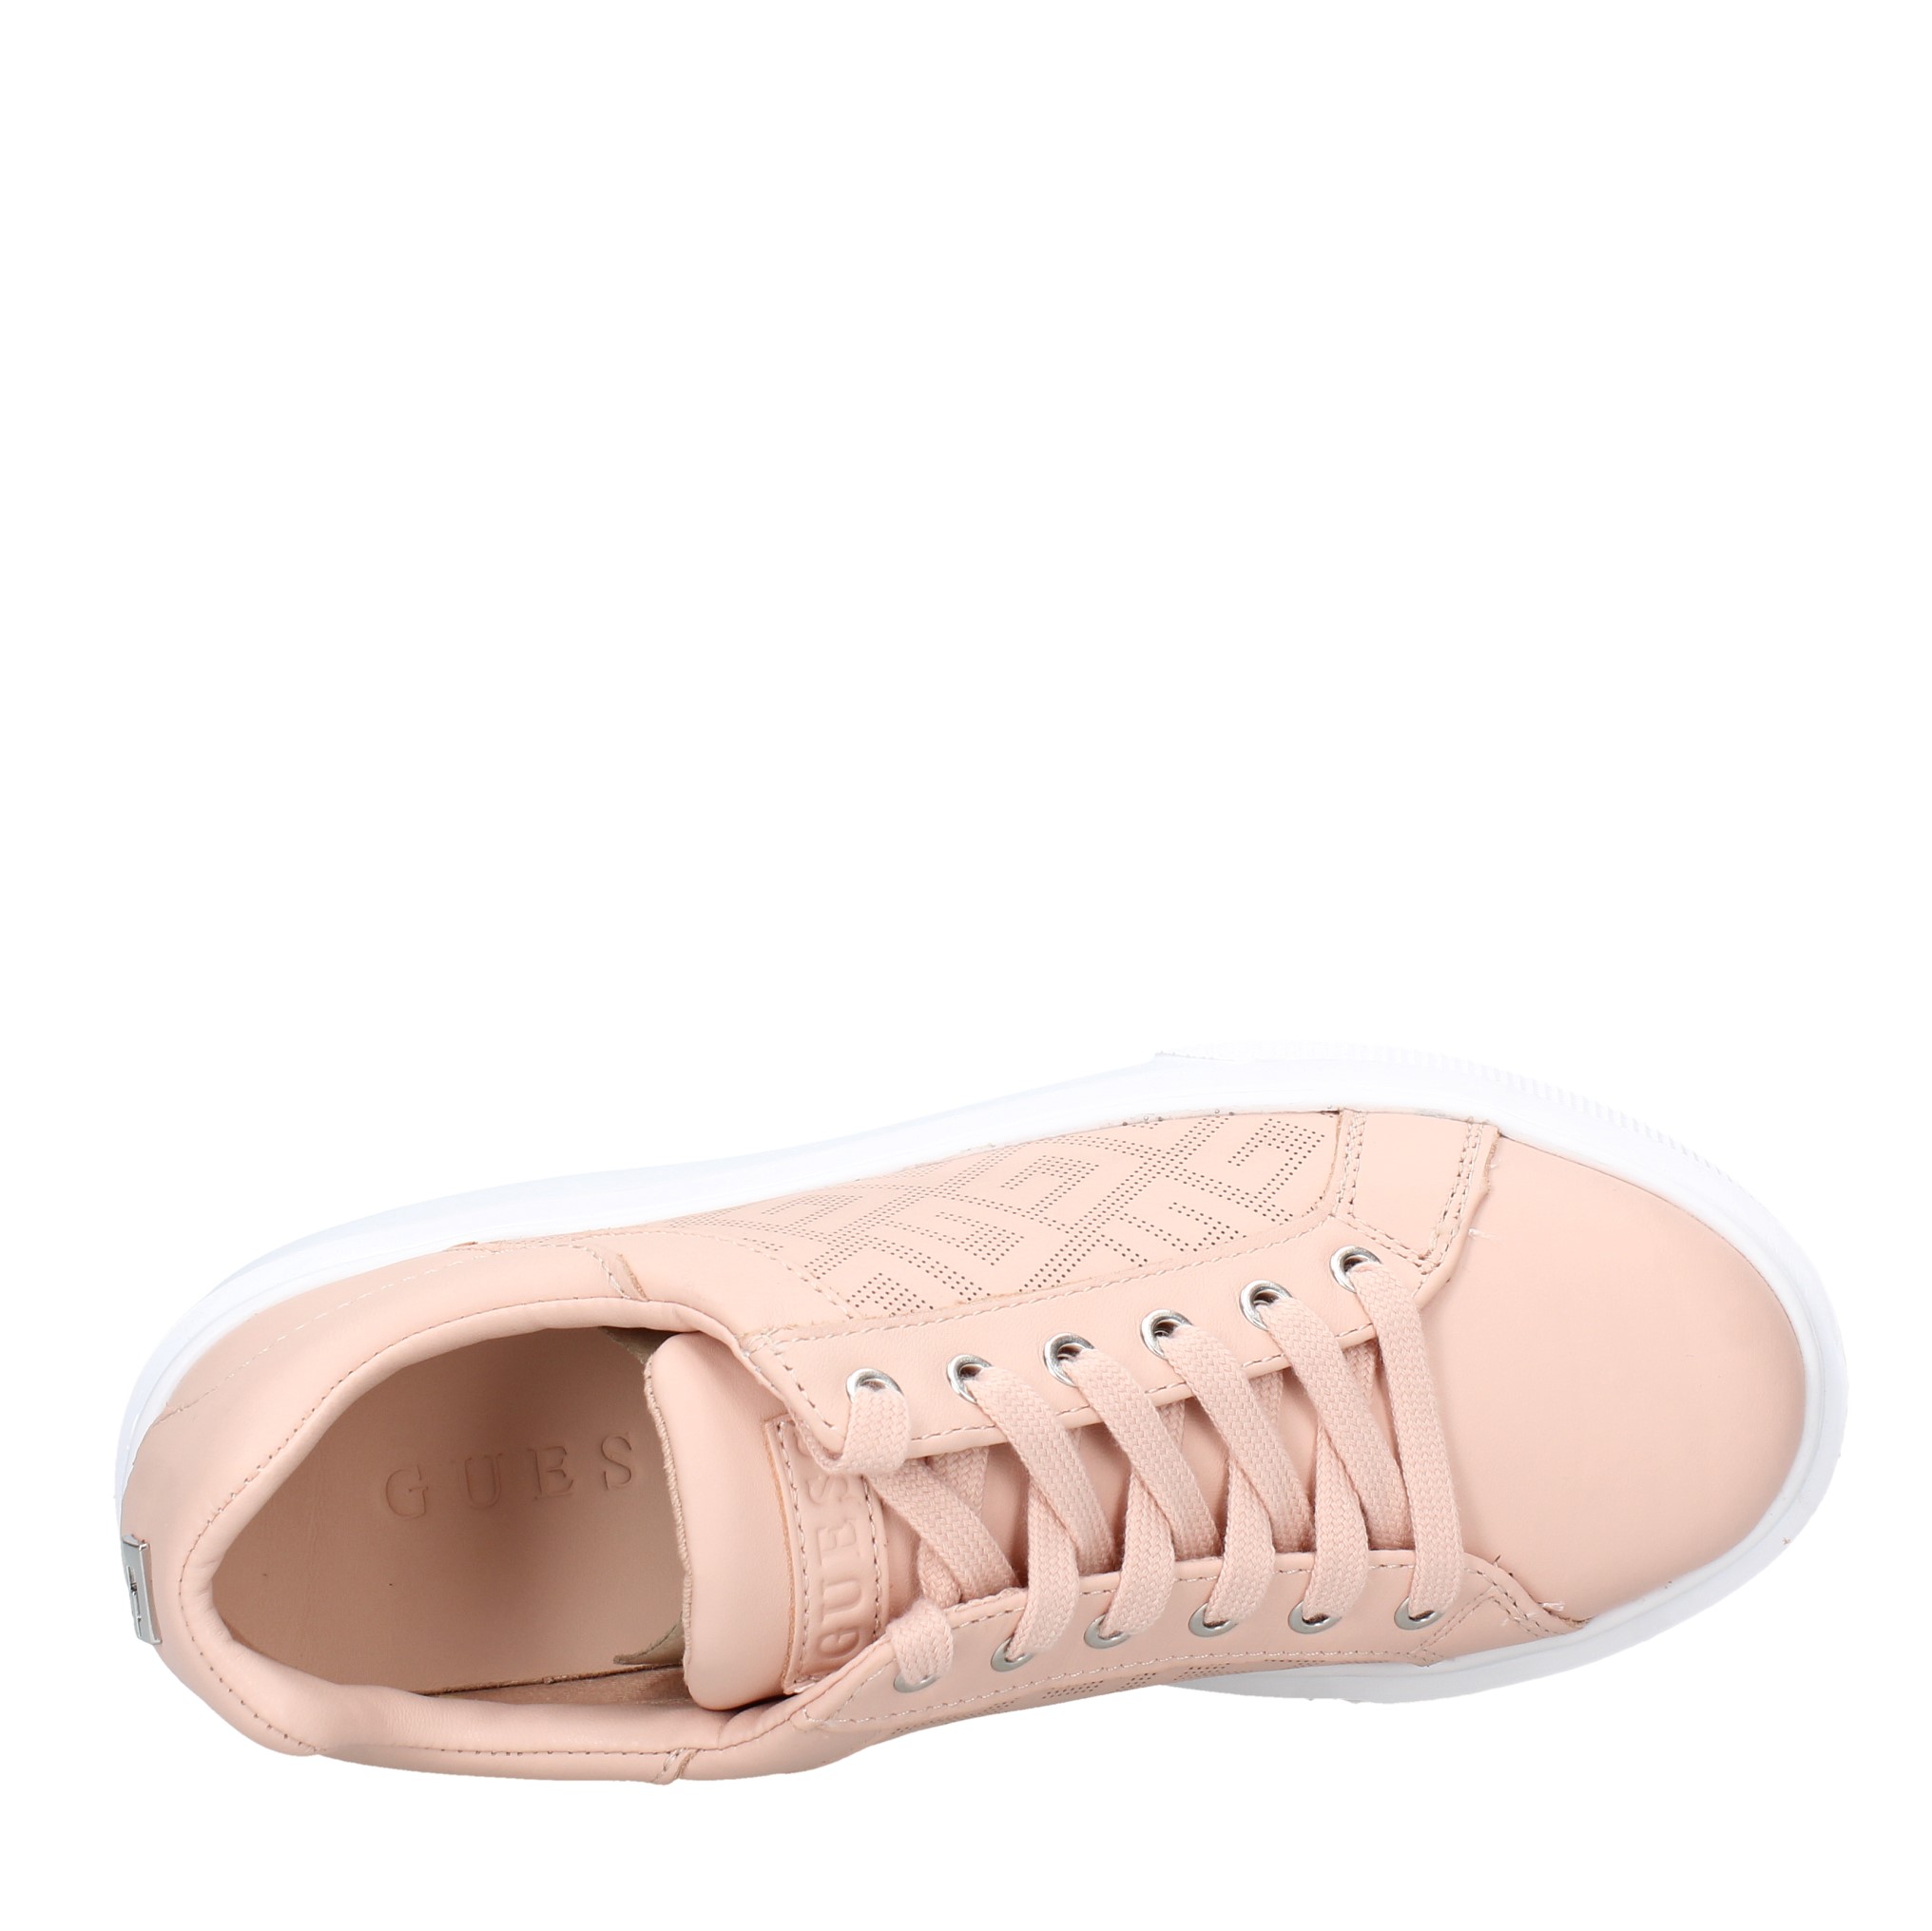 Sneakers in pelle - GUESS - Ginevra calzature